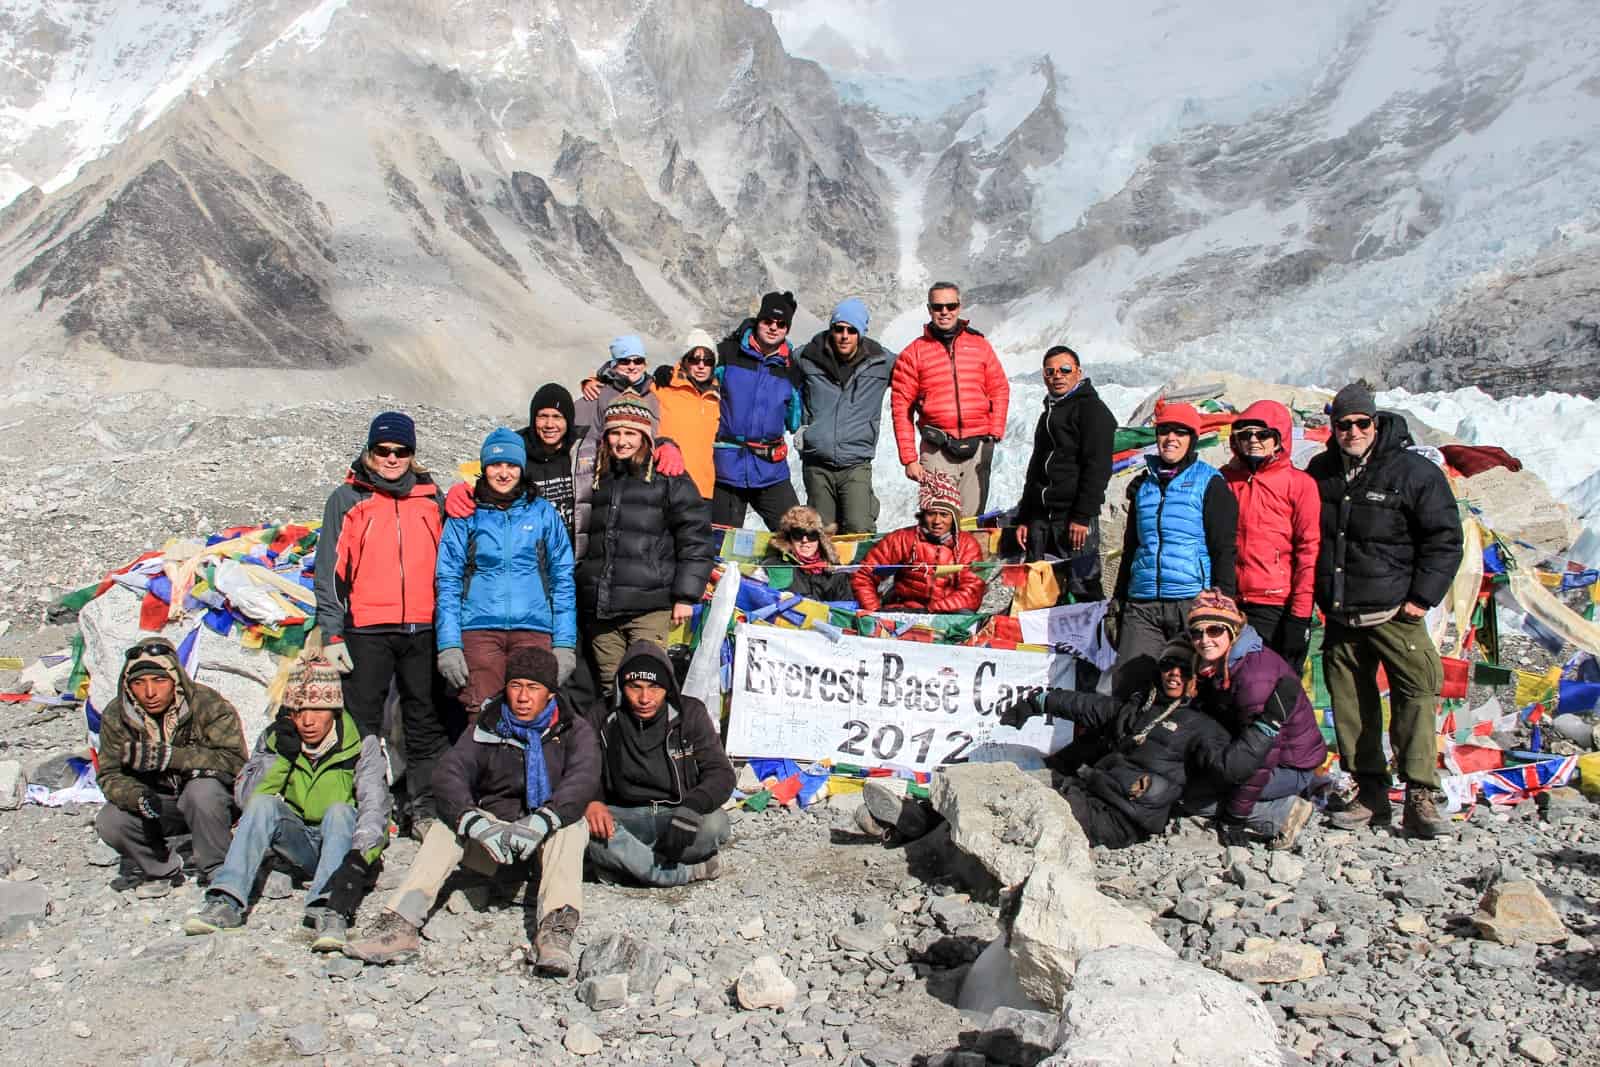 A group of trekkers at Everest Base Camp posing for a group shot around a sign with a 2012 date. Behind are the lower brown mountain slopes and a patch of ice.